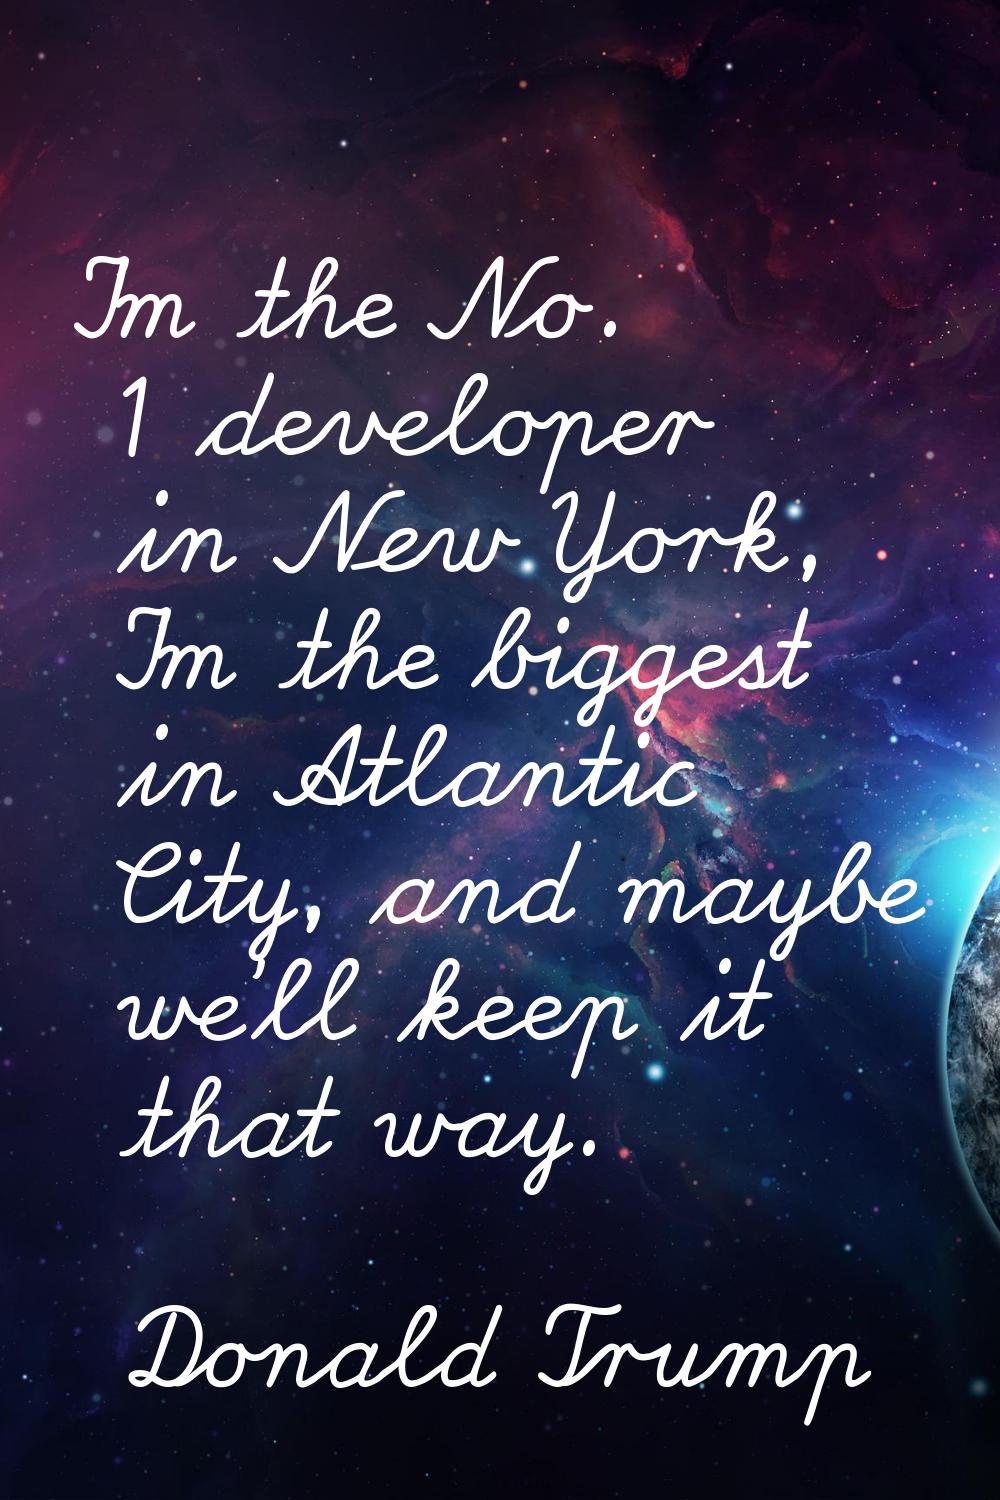 I'm the No. 1 developer in New York, I'm the biggest in Atlantic City, and maybe we'll keep it that